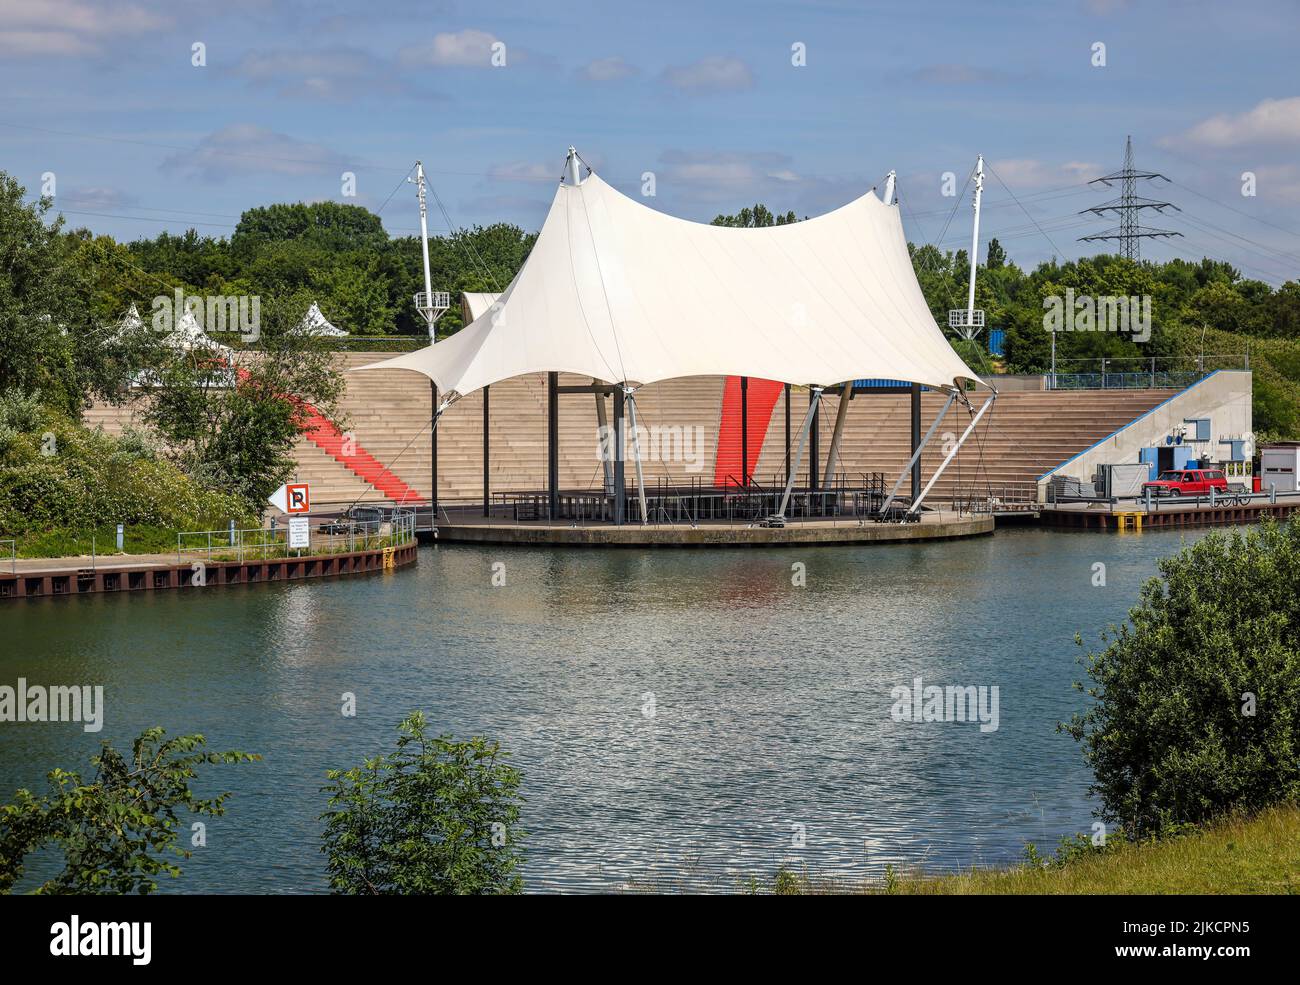 Gelsenkirchen, North Rhine-Westphalia, Germany - Nordsternpark, here with the open-air stage Amphitheater on the Rhine-Herne Canal. Parks and gardens Stock Photo